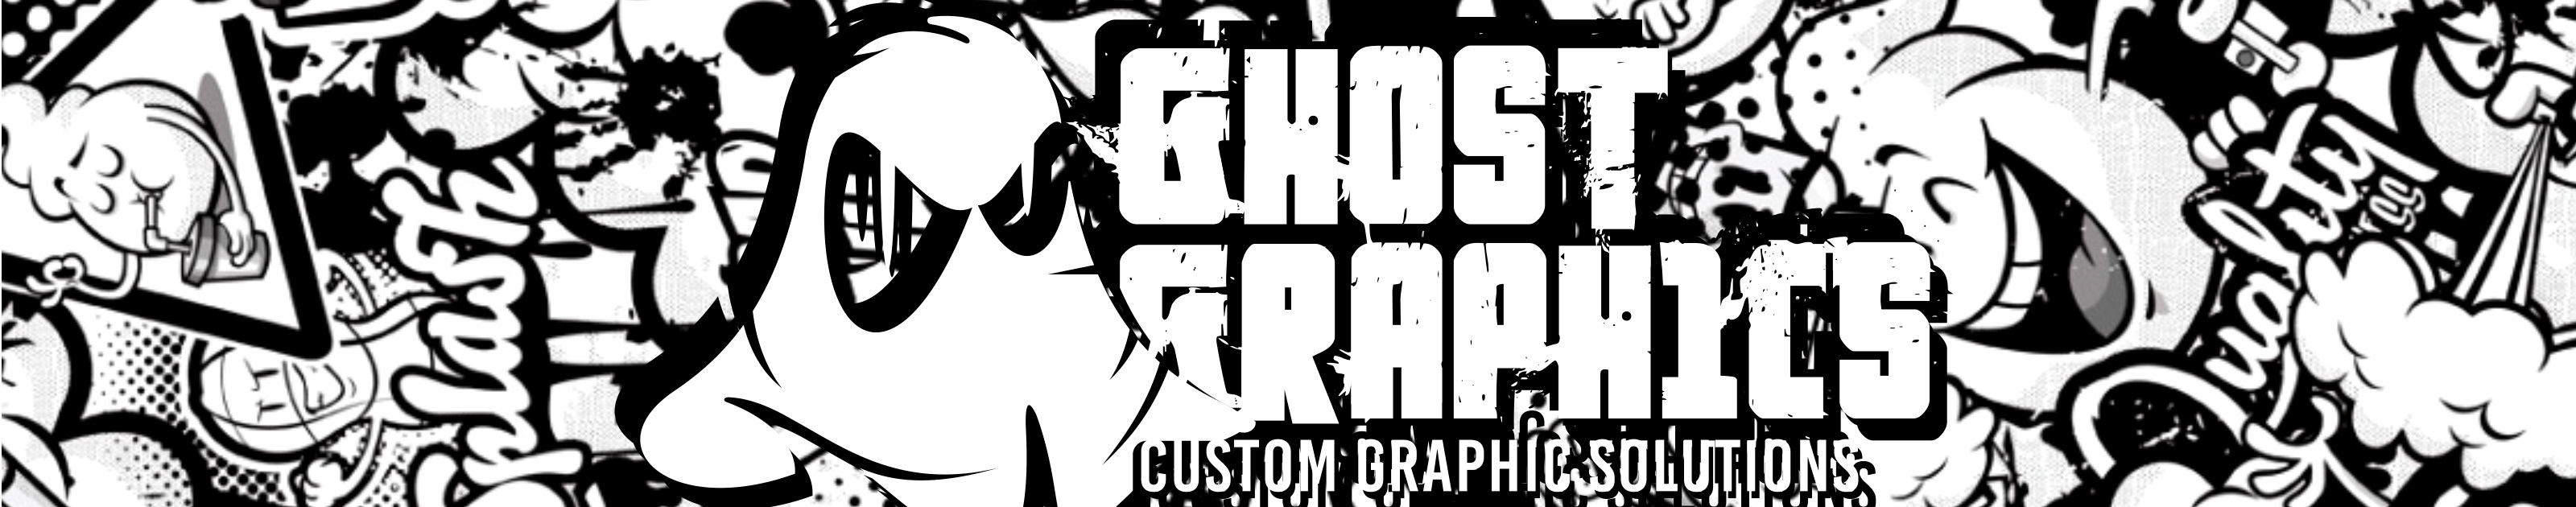 GHOST Graphics's profile banner